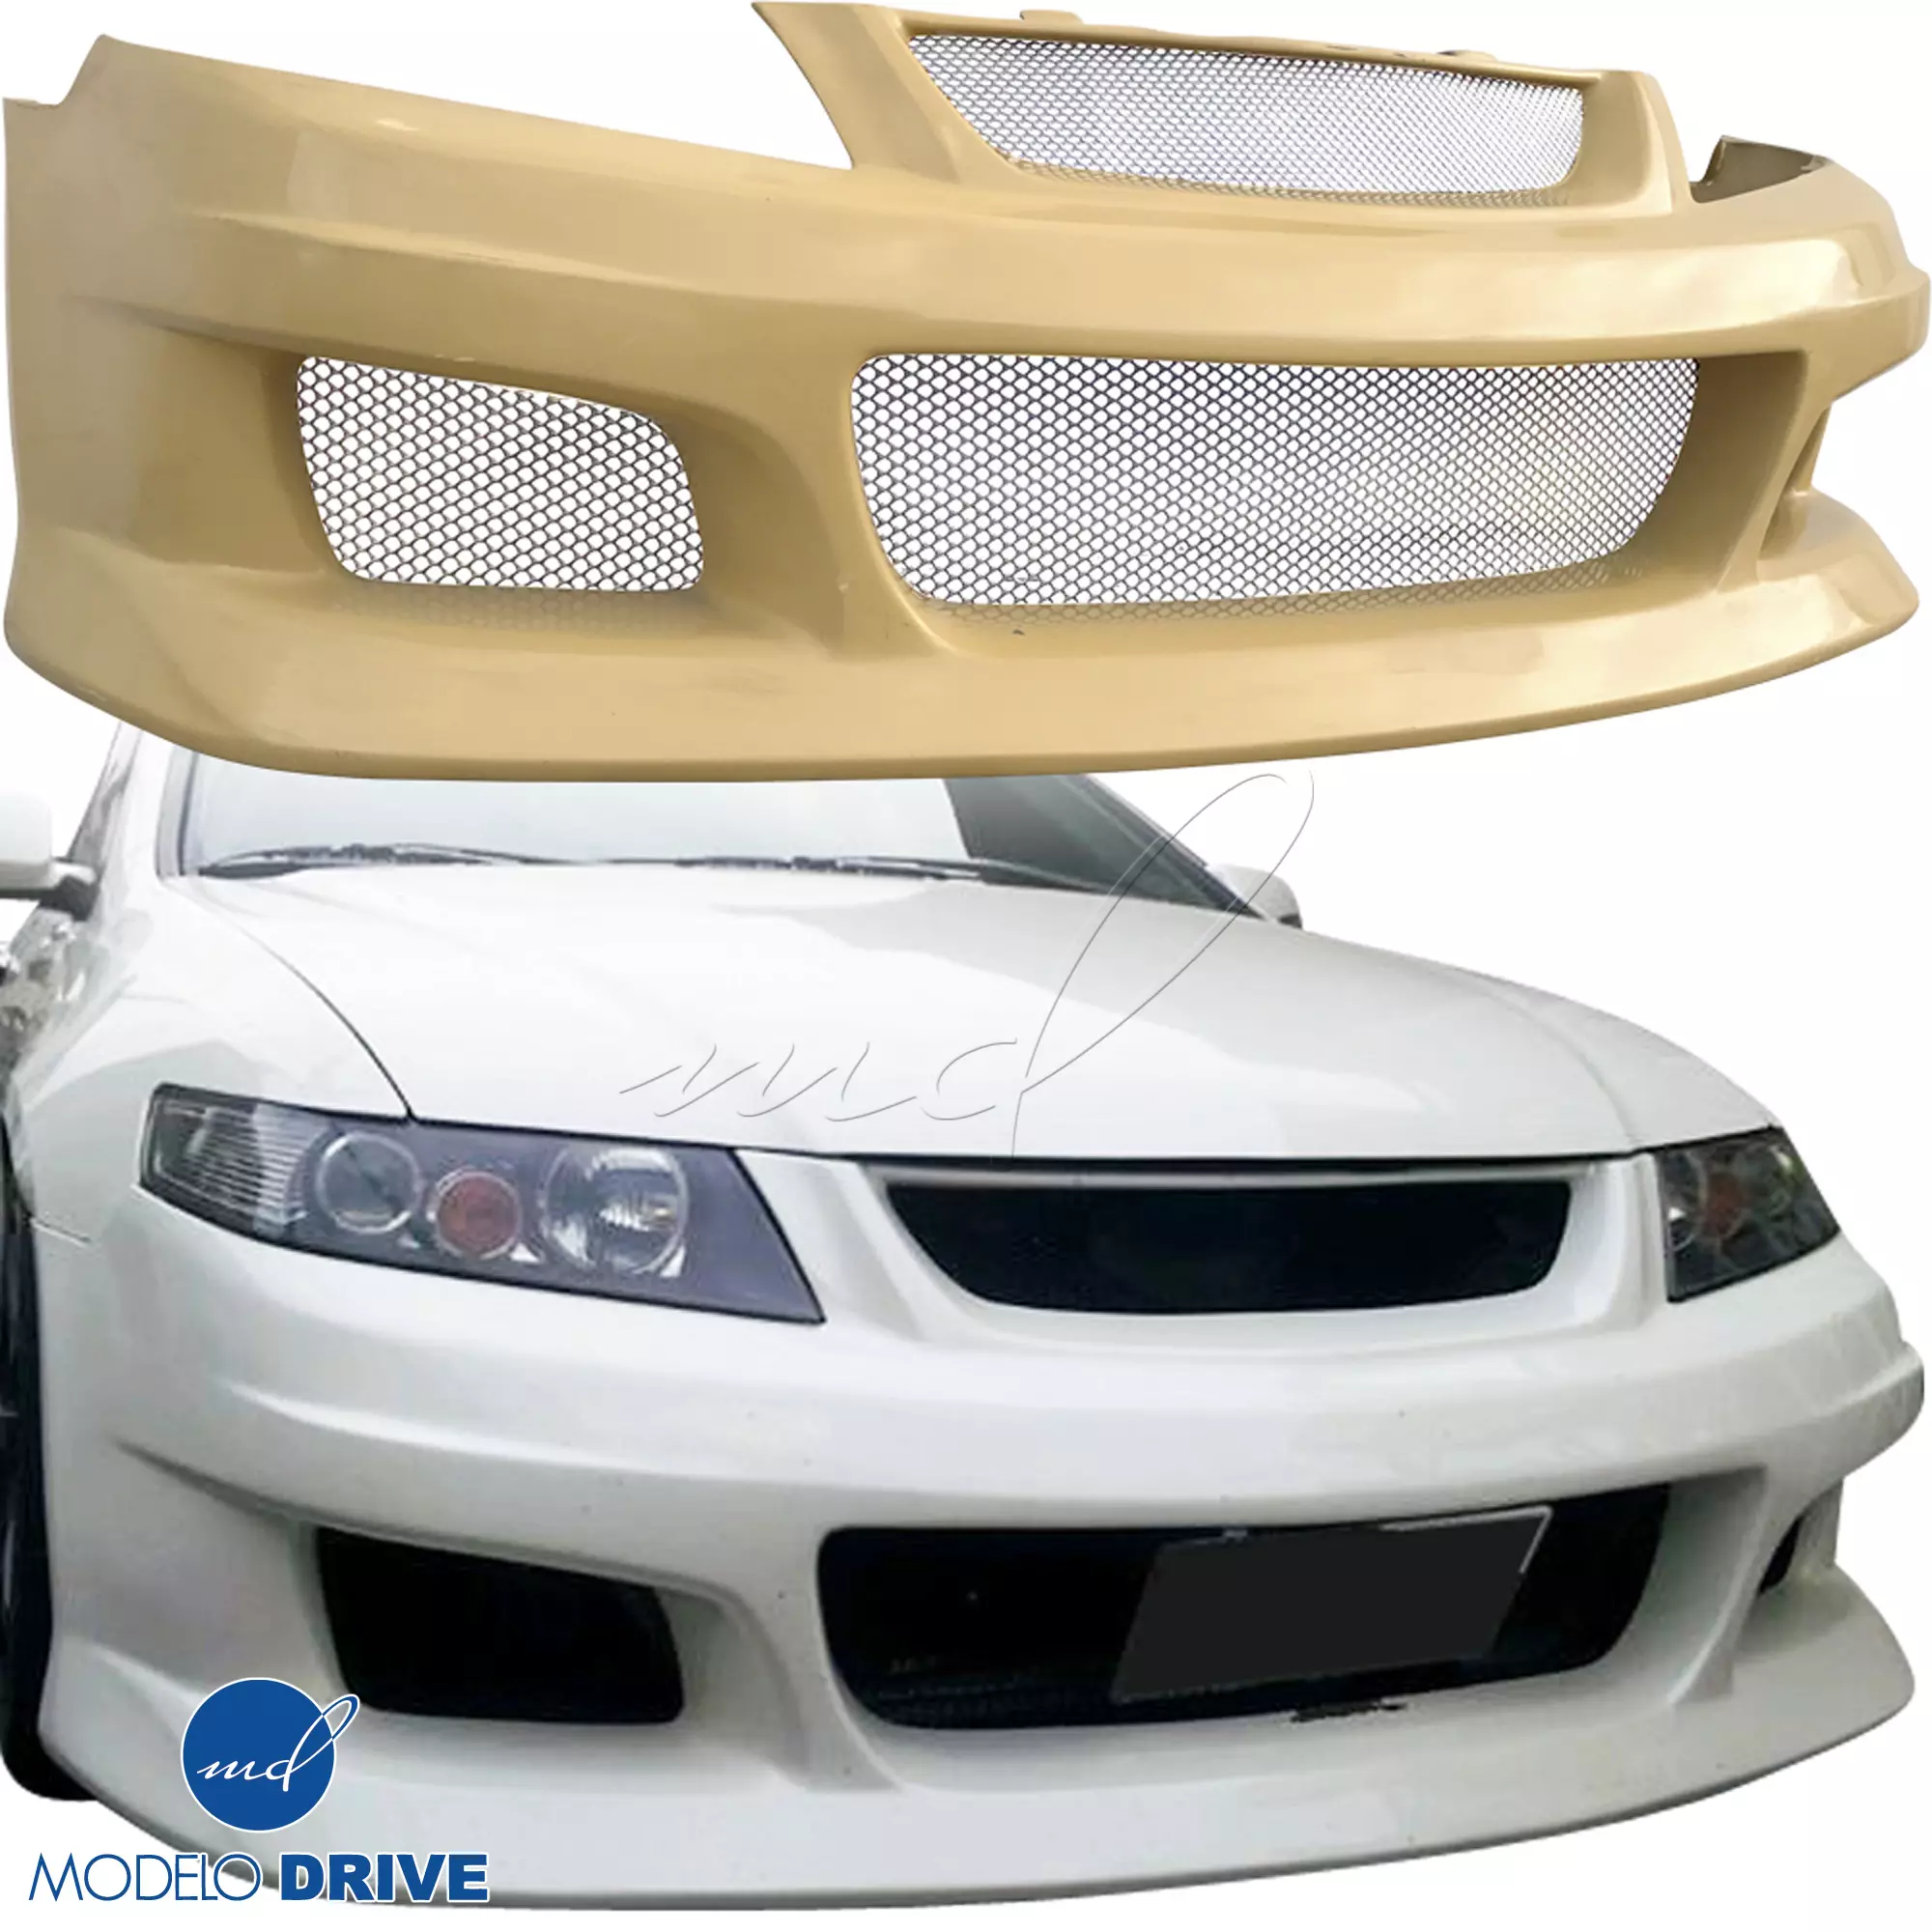 ModeloDrive FRP PHAS Front Bumper > Acura TSX CL9 2004-2008 - Image 29